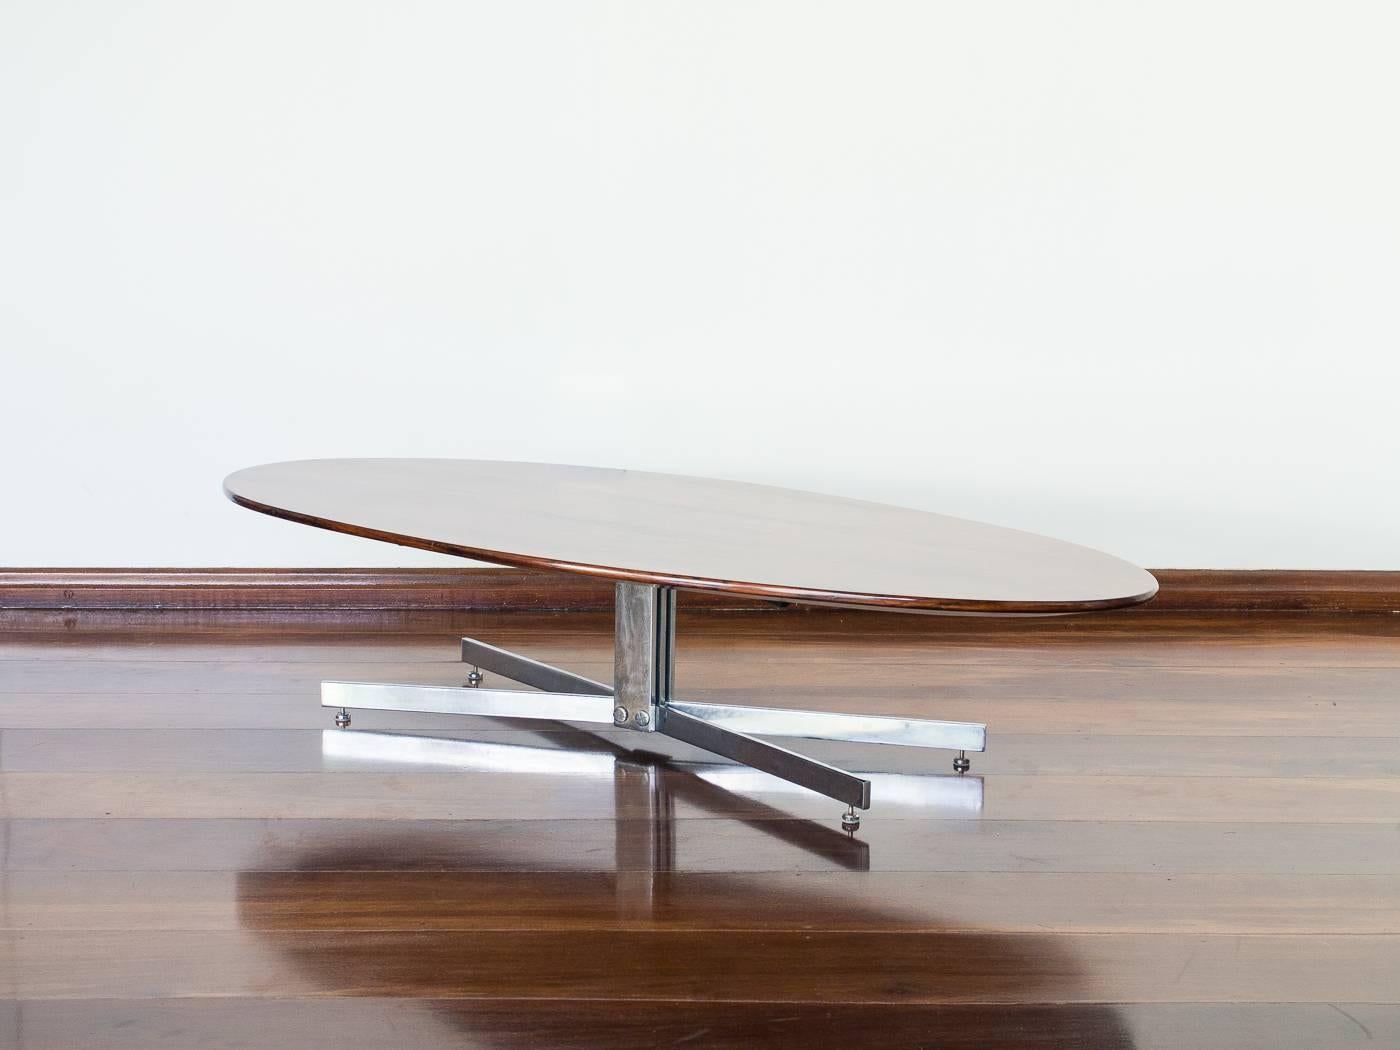 Beautiful table, rare model coming out of the spoils of government buildings in Brasília. Chrome legs lead to a beautiful beveled top, with solid rosewood edges and amazing light toned rosewood veneer on top.